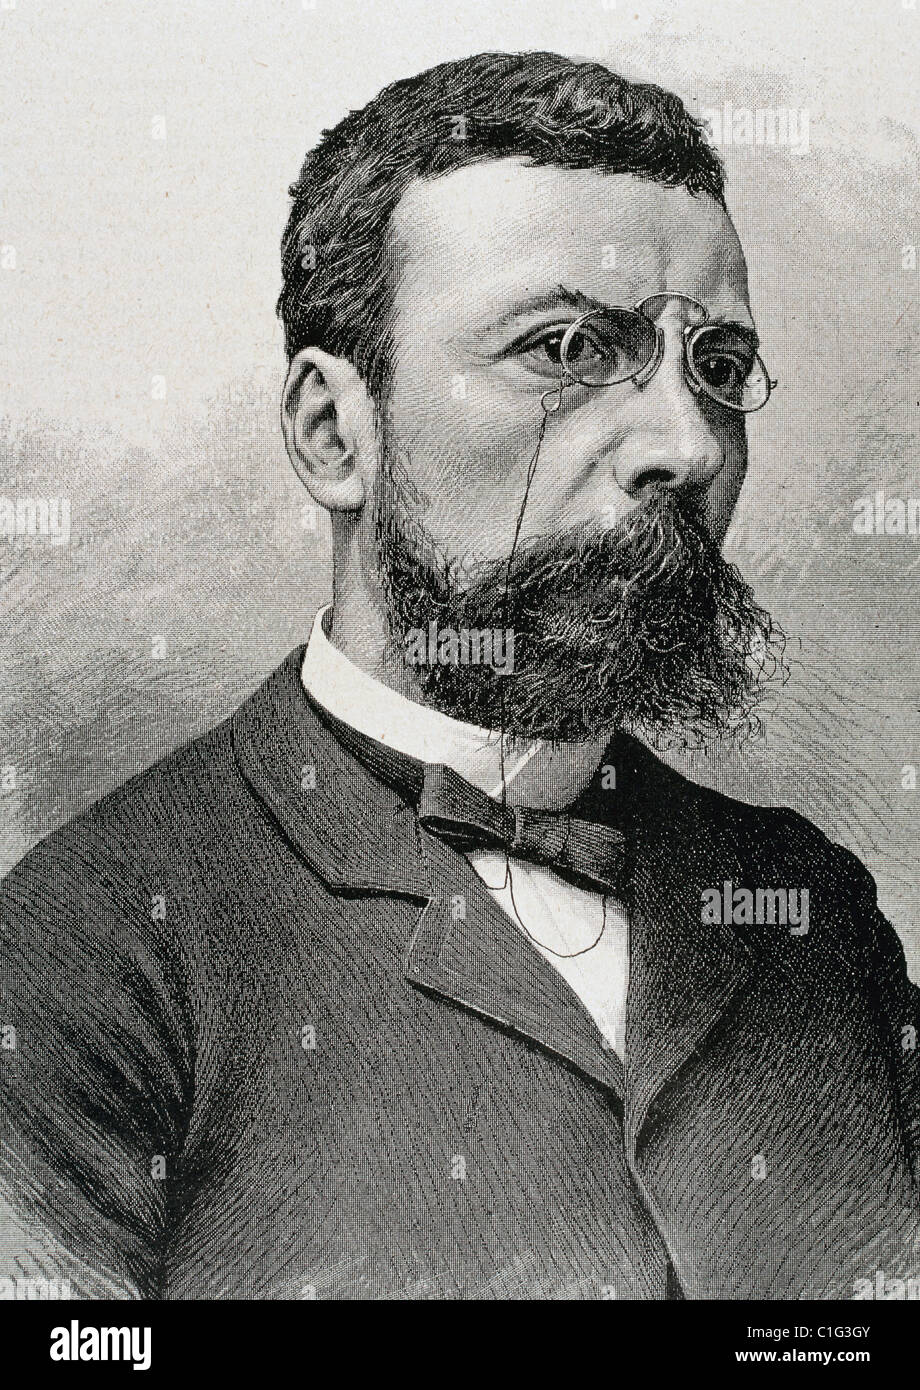 Angel Guimera (1849-1924). Dramatist and poet in the Catalan language. Engraving. Stock Photo